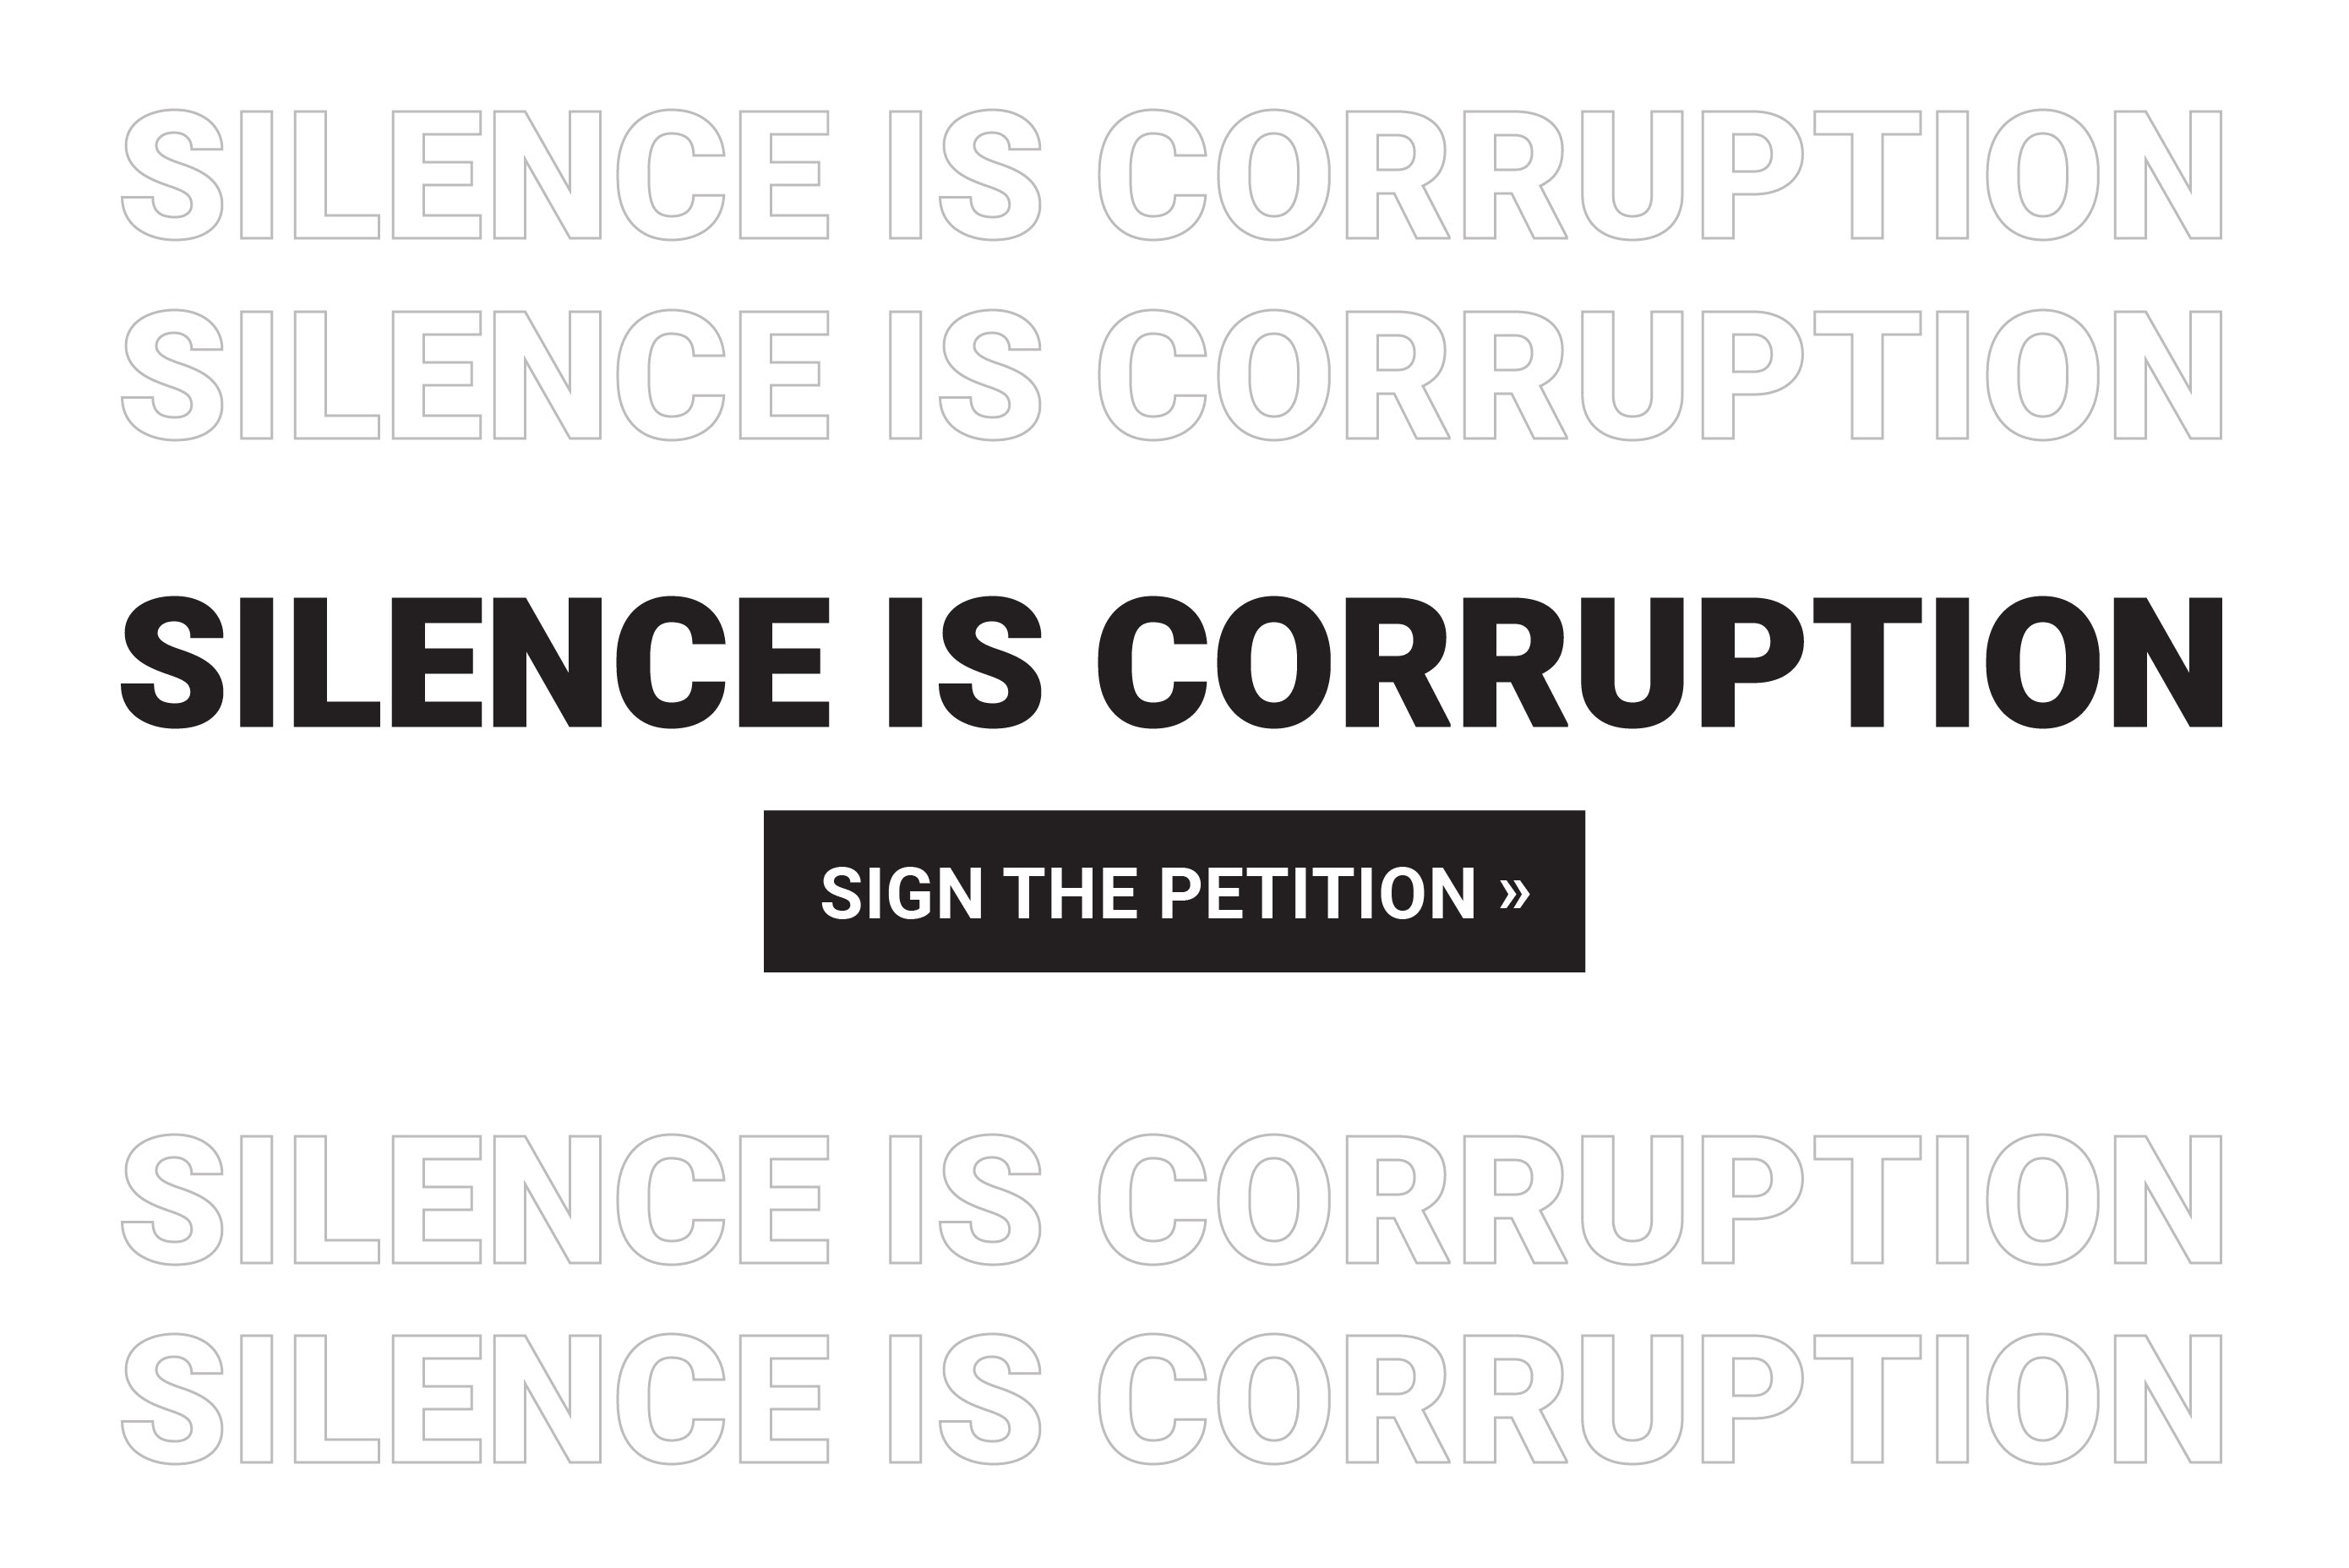 Silence_is_Corruption_Petition_(002).jpg